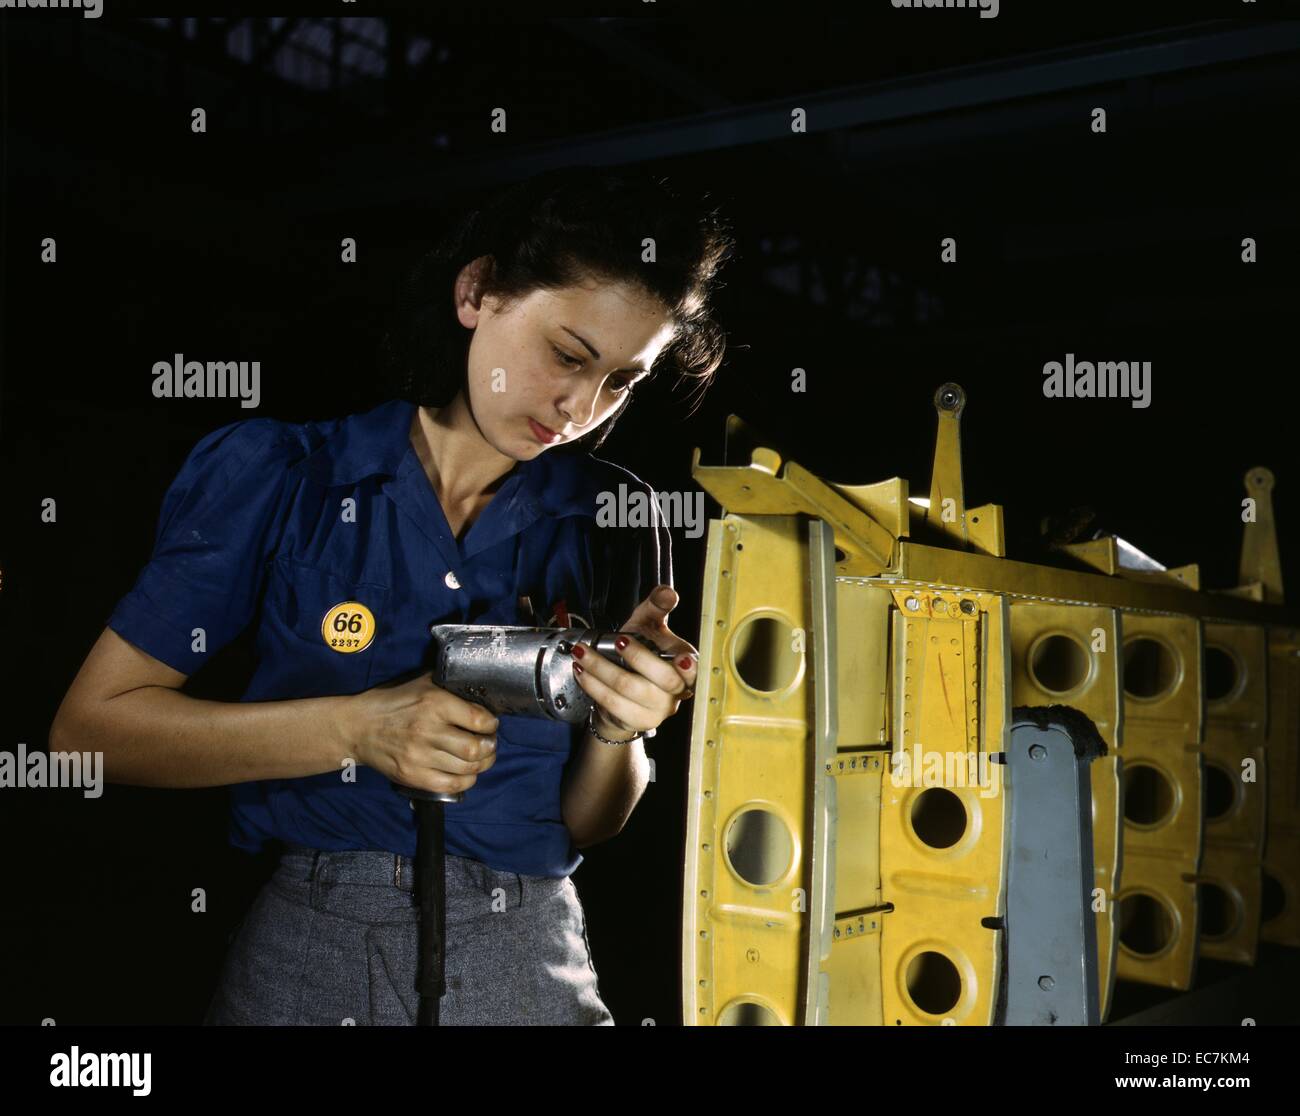 Drilling horizontal stabilizers: operating a hand drill, this woman worker at Vultee-Nashville is shown working on the horizontal stabilizer for a Vultee 'Vengeance' dive bomber, Tennessee. The 'Vengeance' (A-31) was originally designed for the French and was later adopted by the R.A.F. and still later by the U.S. Army Air Forces. It is a single-engine, low-wing plane, carrying a crew of two men and has six machine guns of varying calibers. Stock Photo